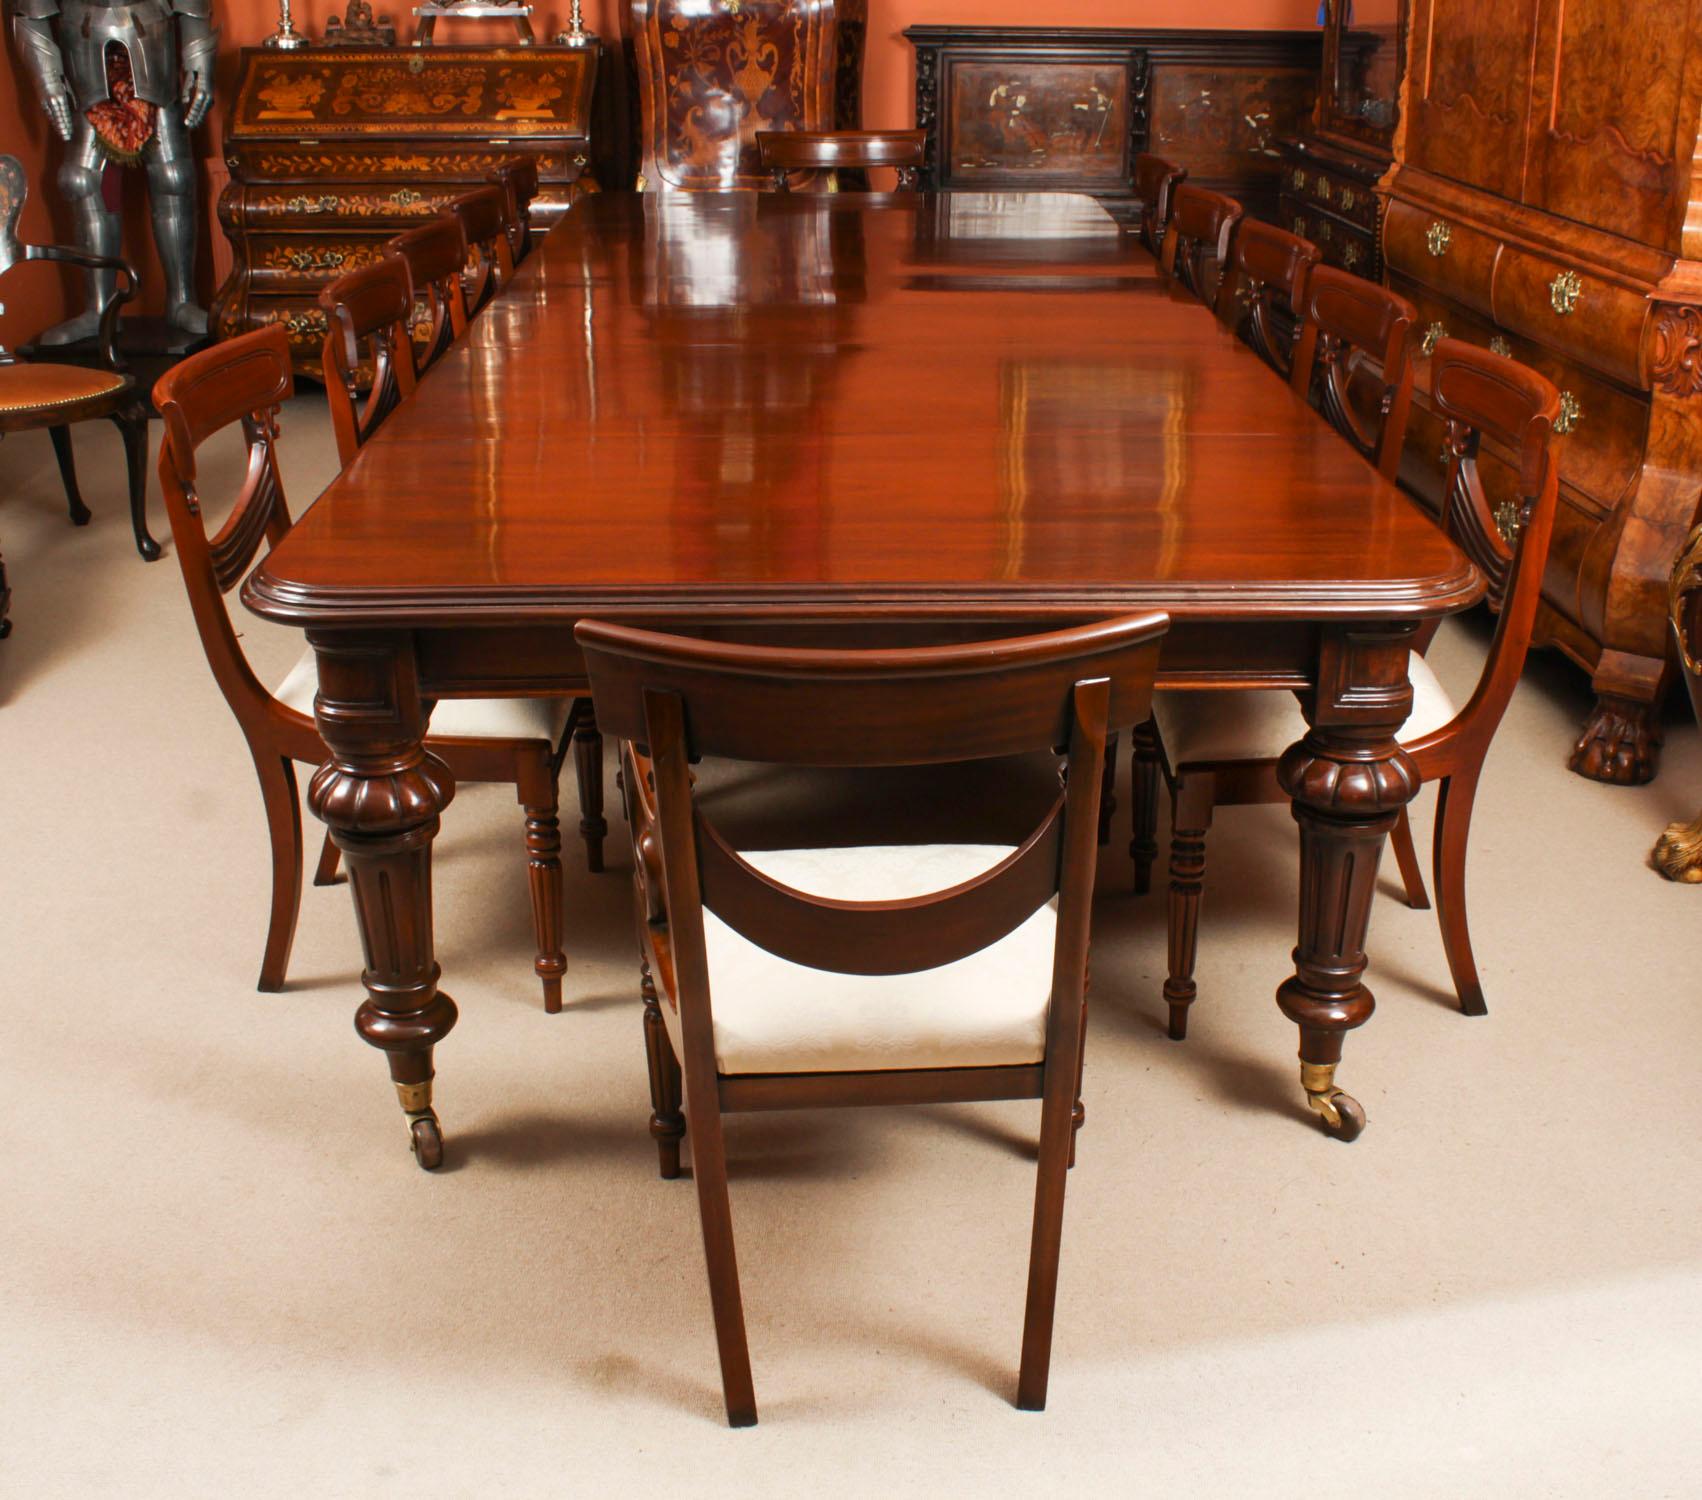 This is a beautiful dining set comprising an antique William IV flame mahogany dining table, Circa 1835 in date, and a beautiful set of fourteen Regency Revival Swag back dining chairs.
 
This amazing table can seat fourteen people in comfort and